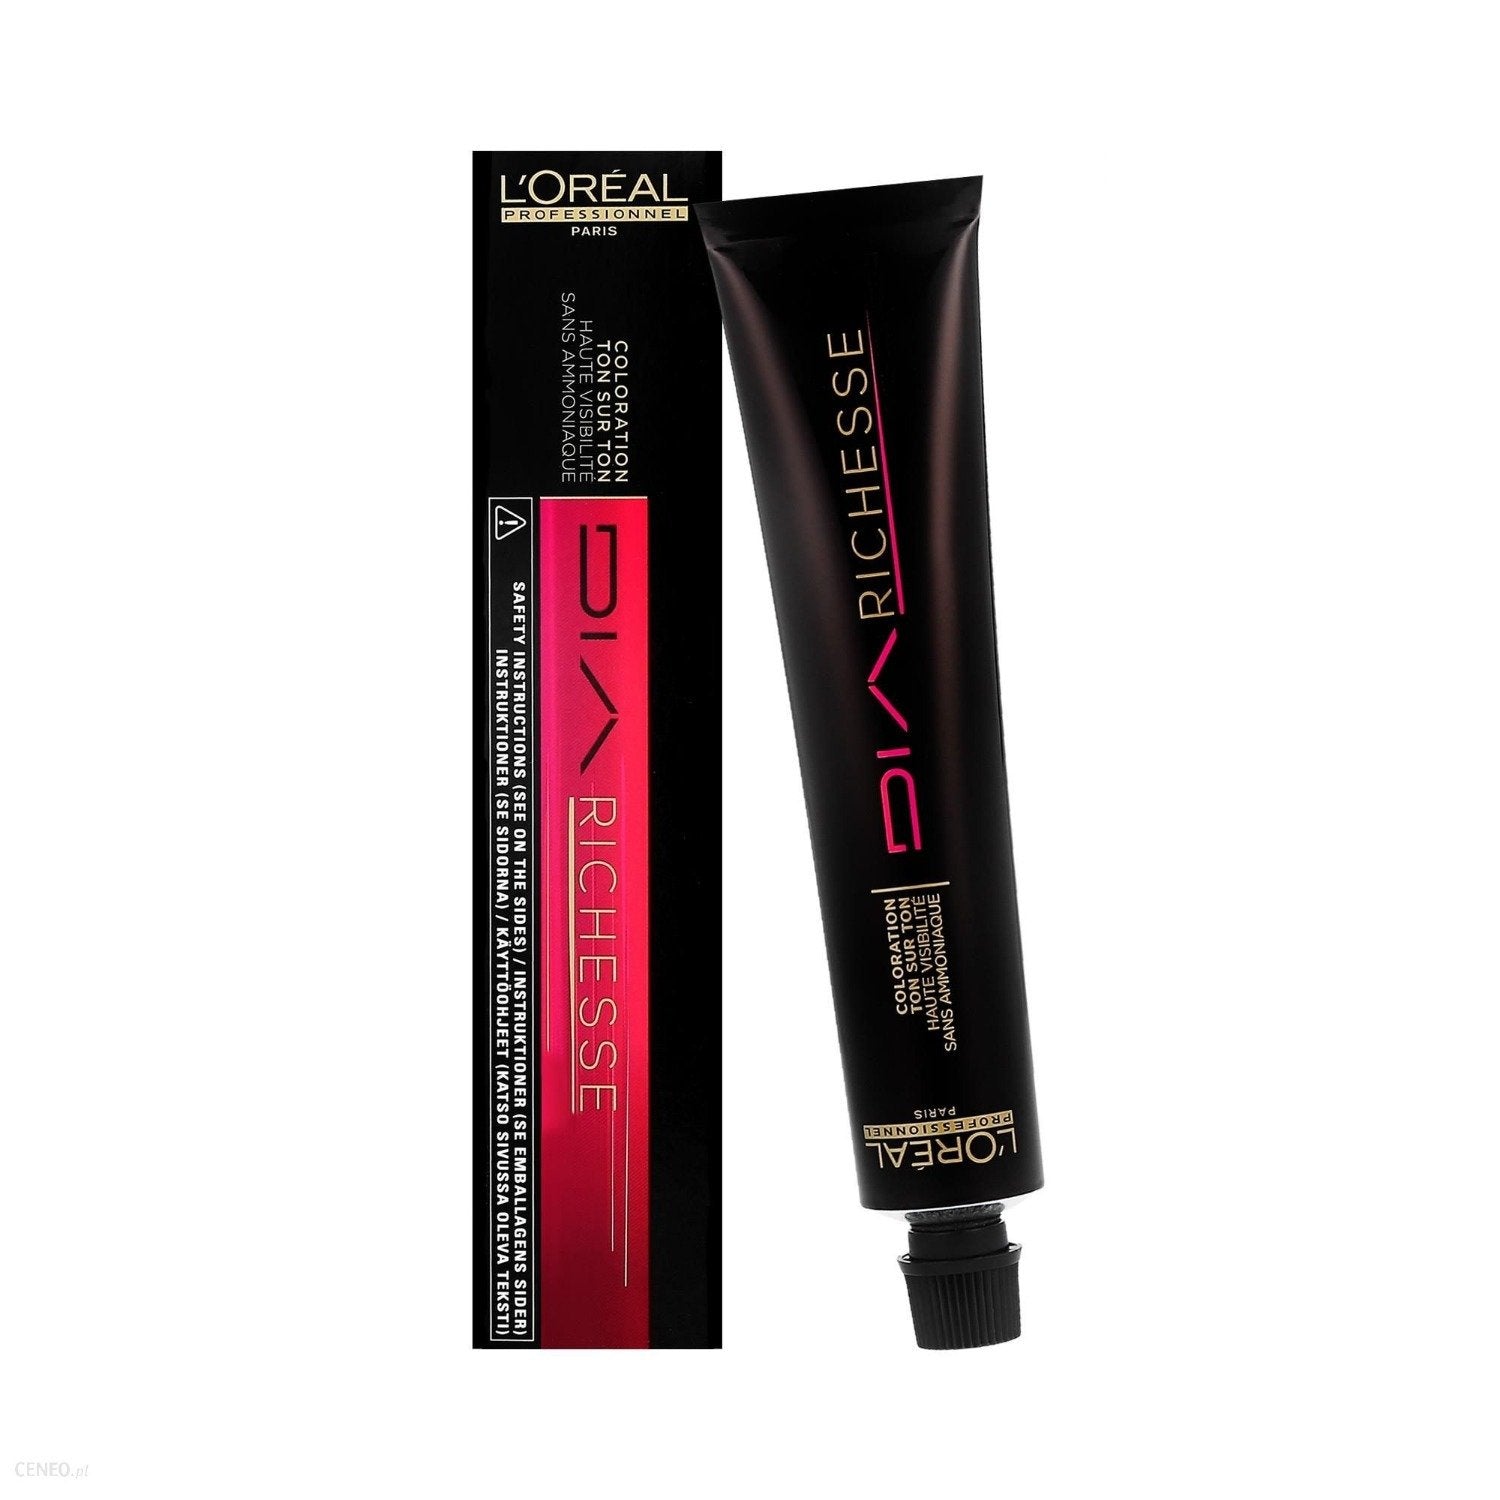 Loreal Professionnel Dia Richesse, 5/5N, 1.7 oz / 48 g Ingredients and  Reviews